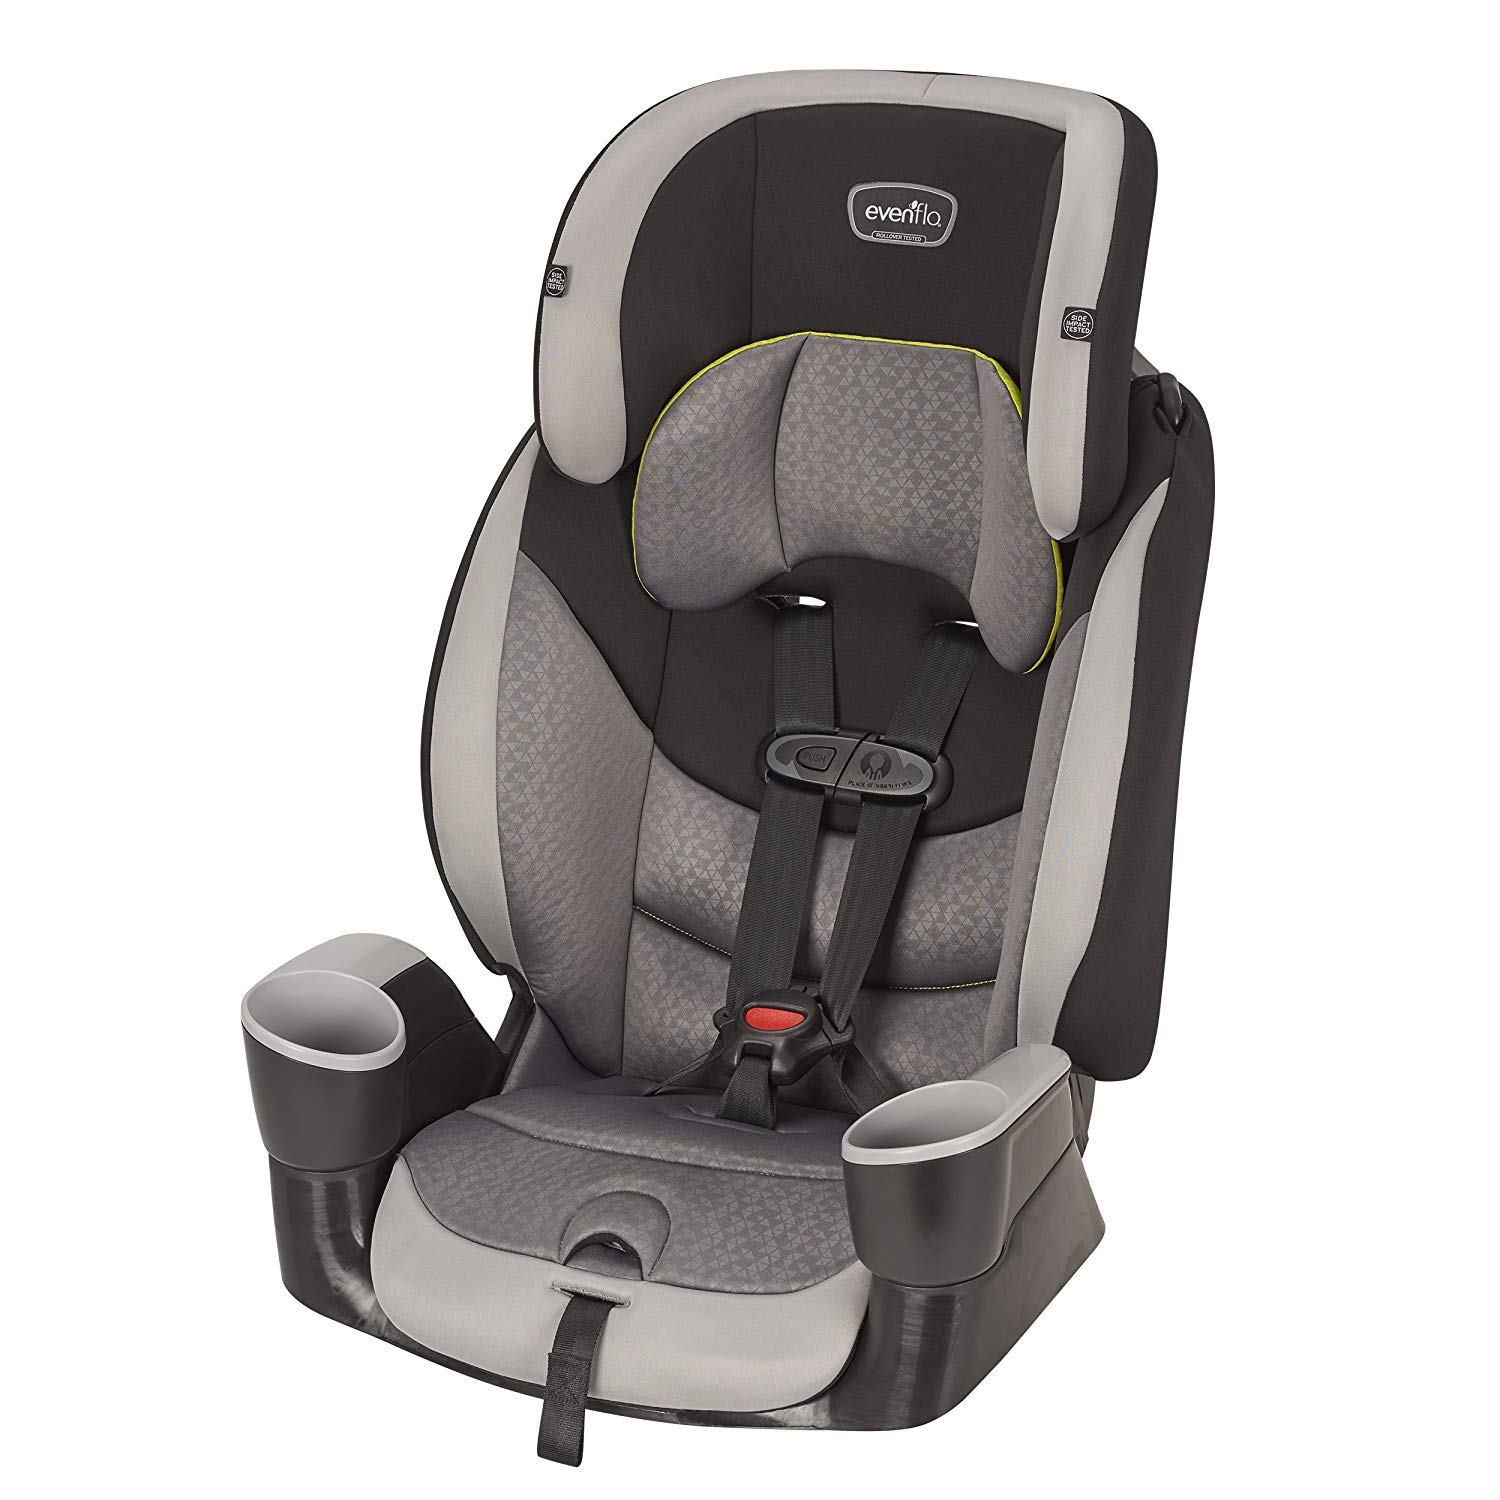 Evenflo Maestro Sport Harness Booster Car Seat Review Best Booster